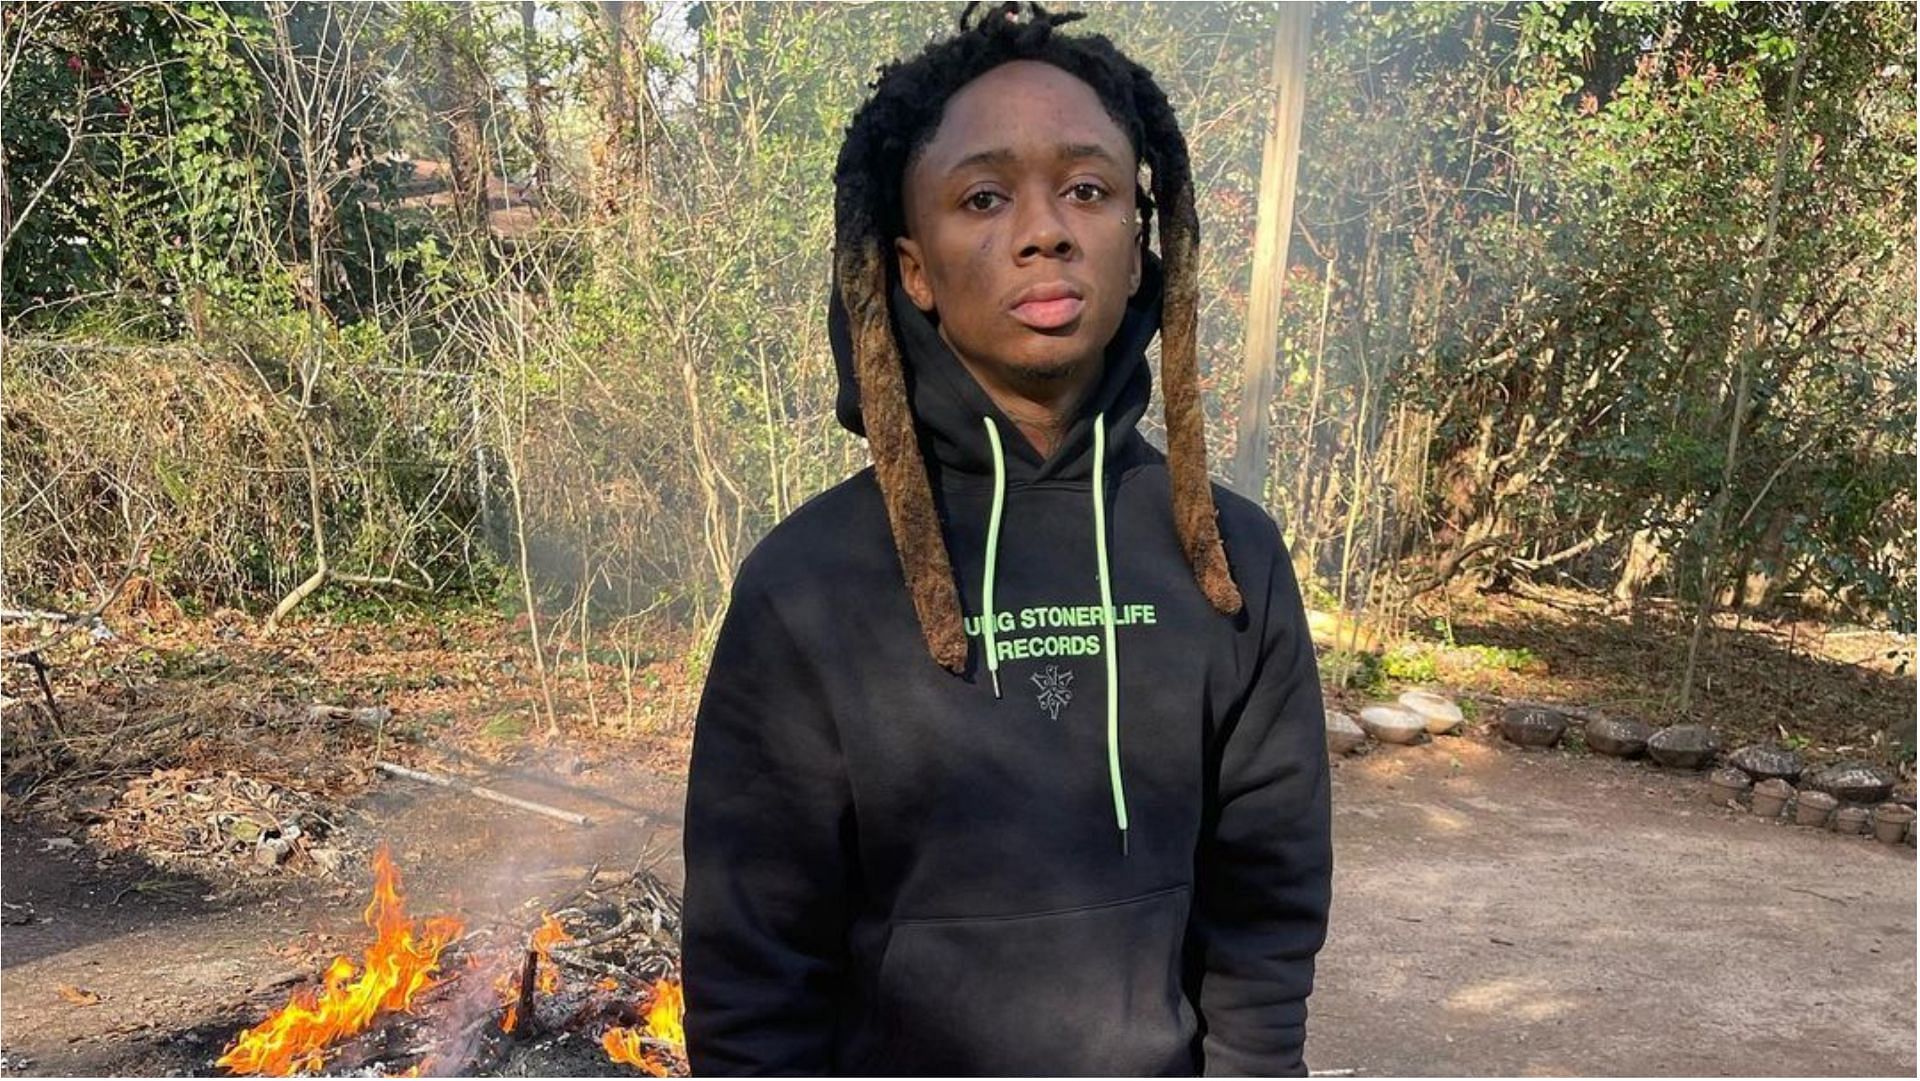 Slimelife Shawty reduced his sentence by entering a plea deal (Image via slimelife.shawty/Instagram)